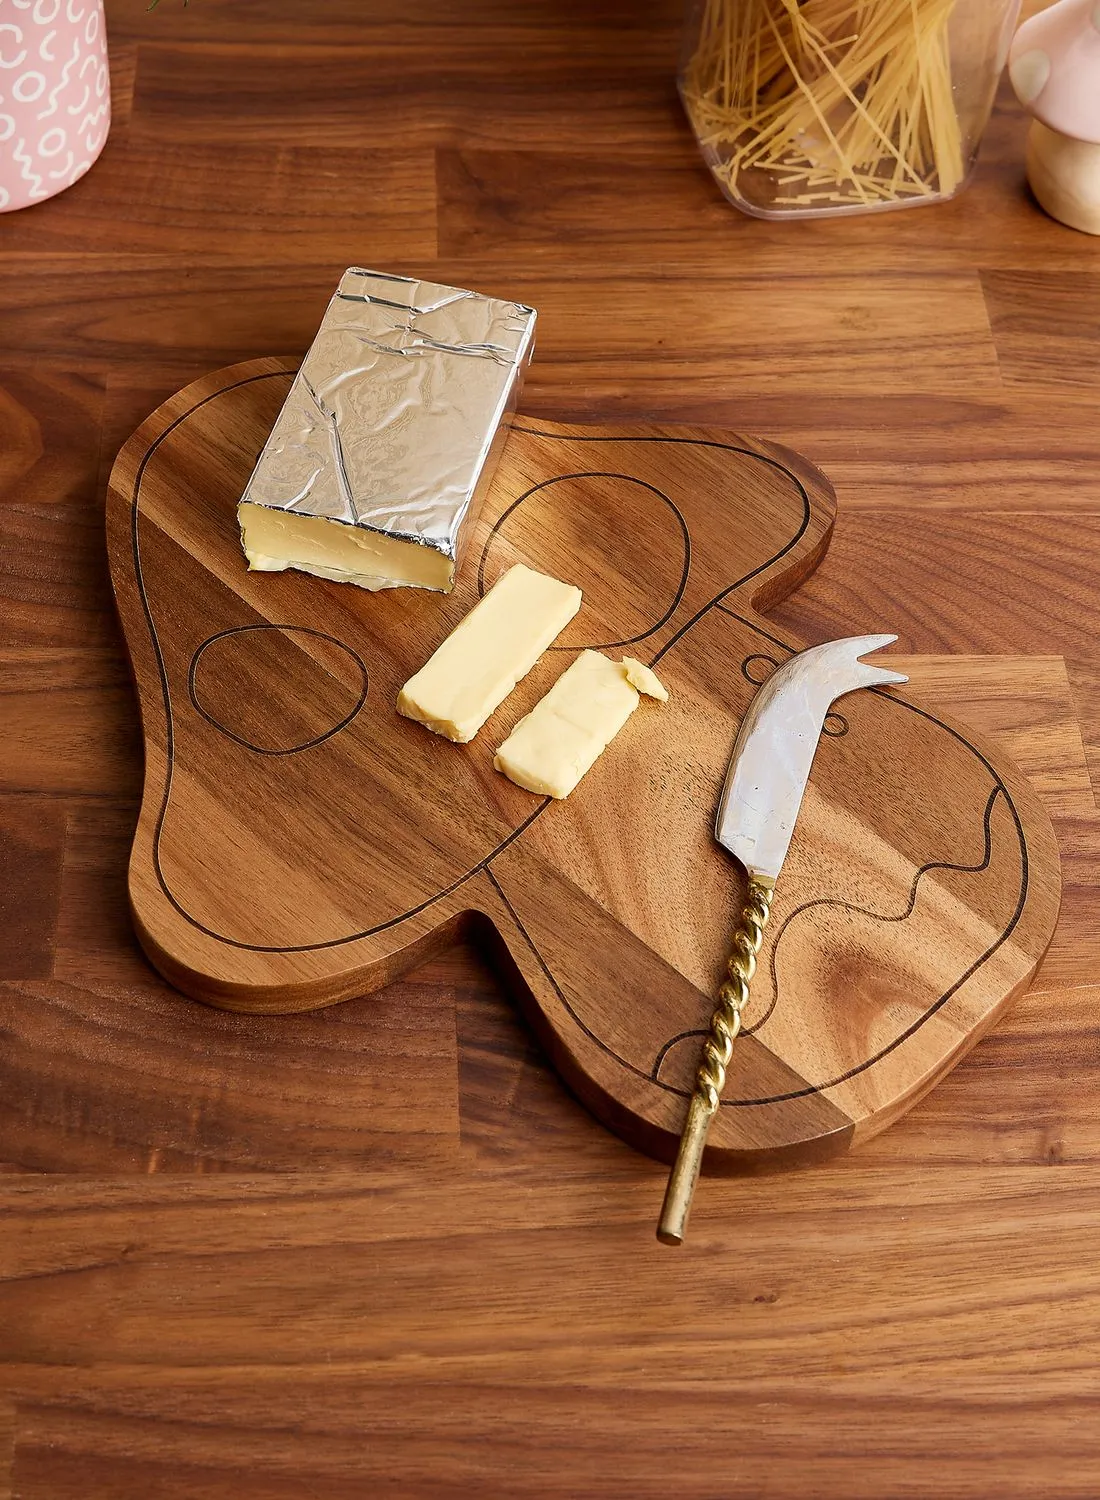 Typo Shaped Cheese Board